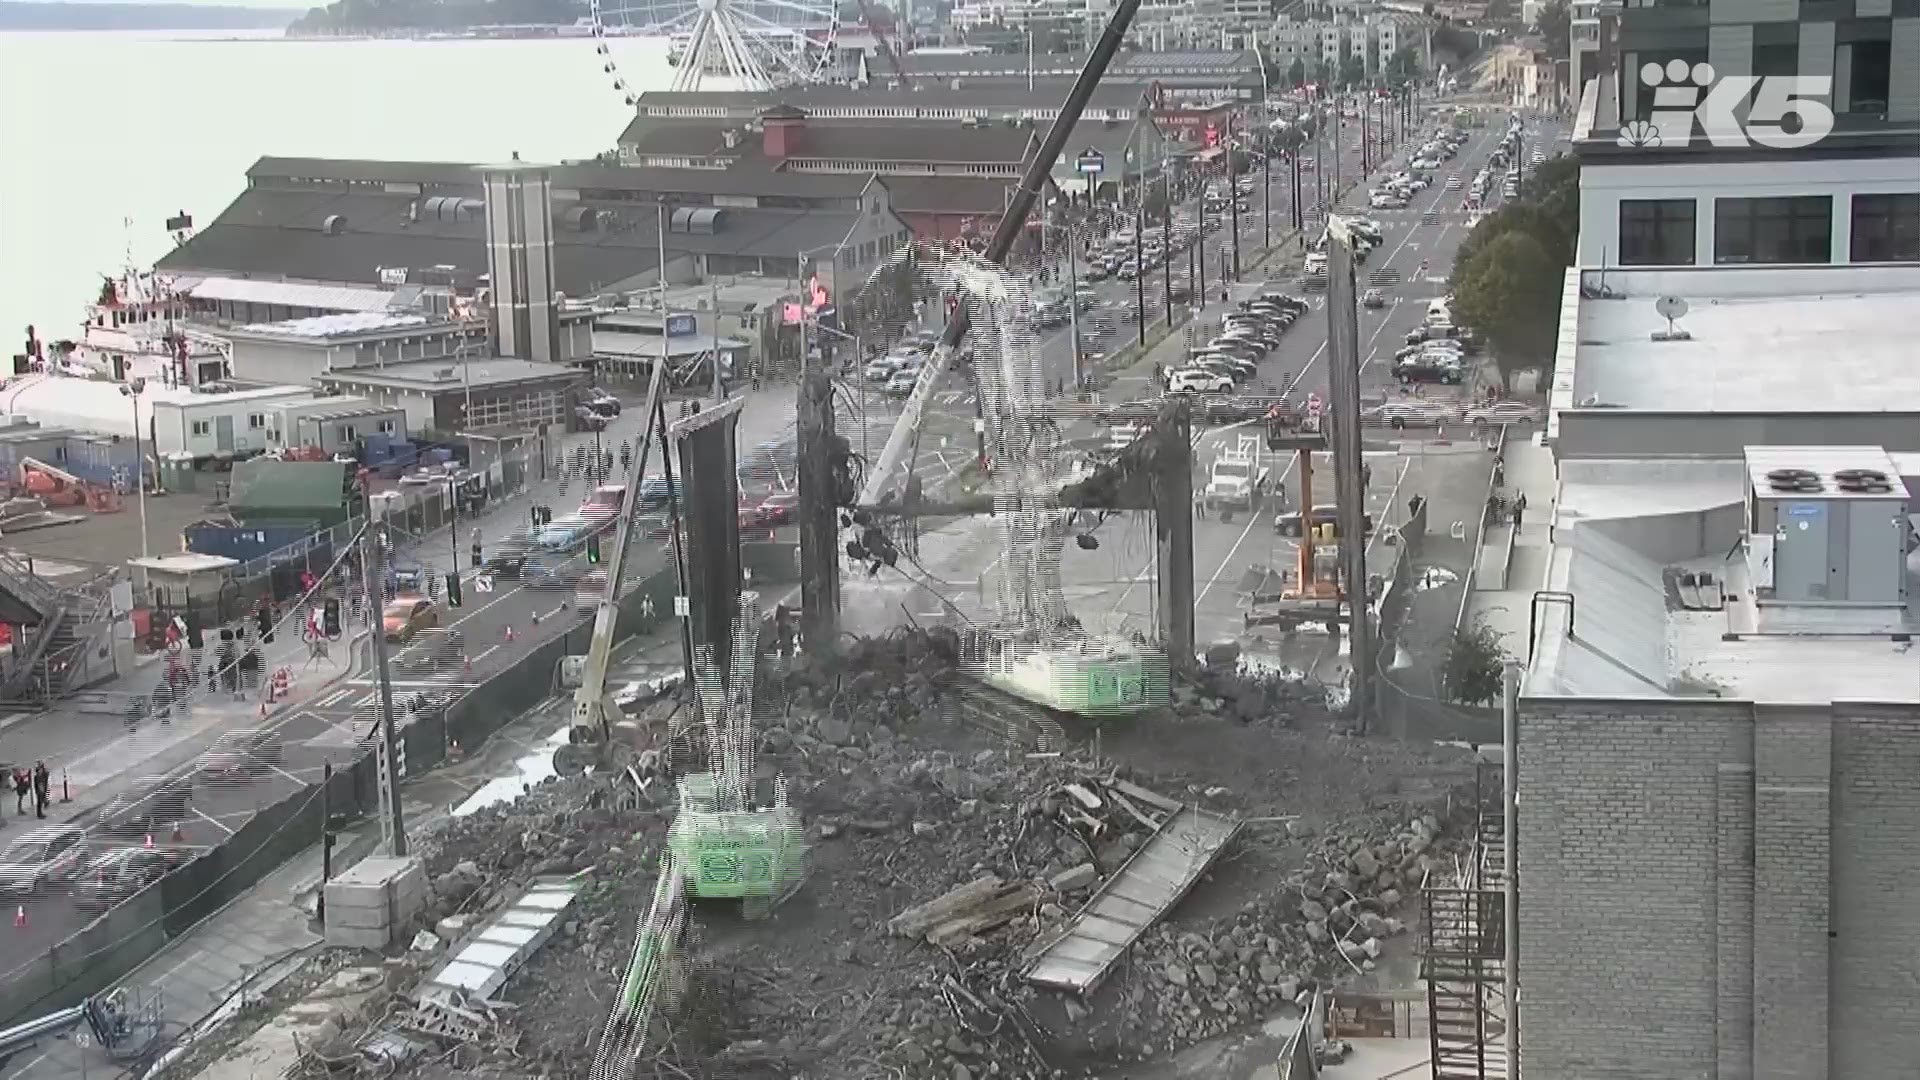 The last double-decker of the Alaskan Way Viaduct in Seattle was demolished on Saturday, September 21, 2019.